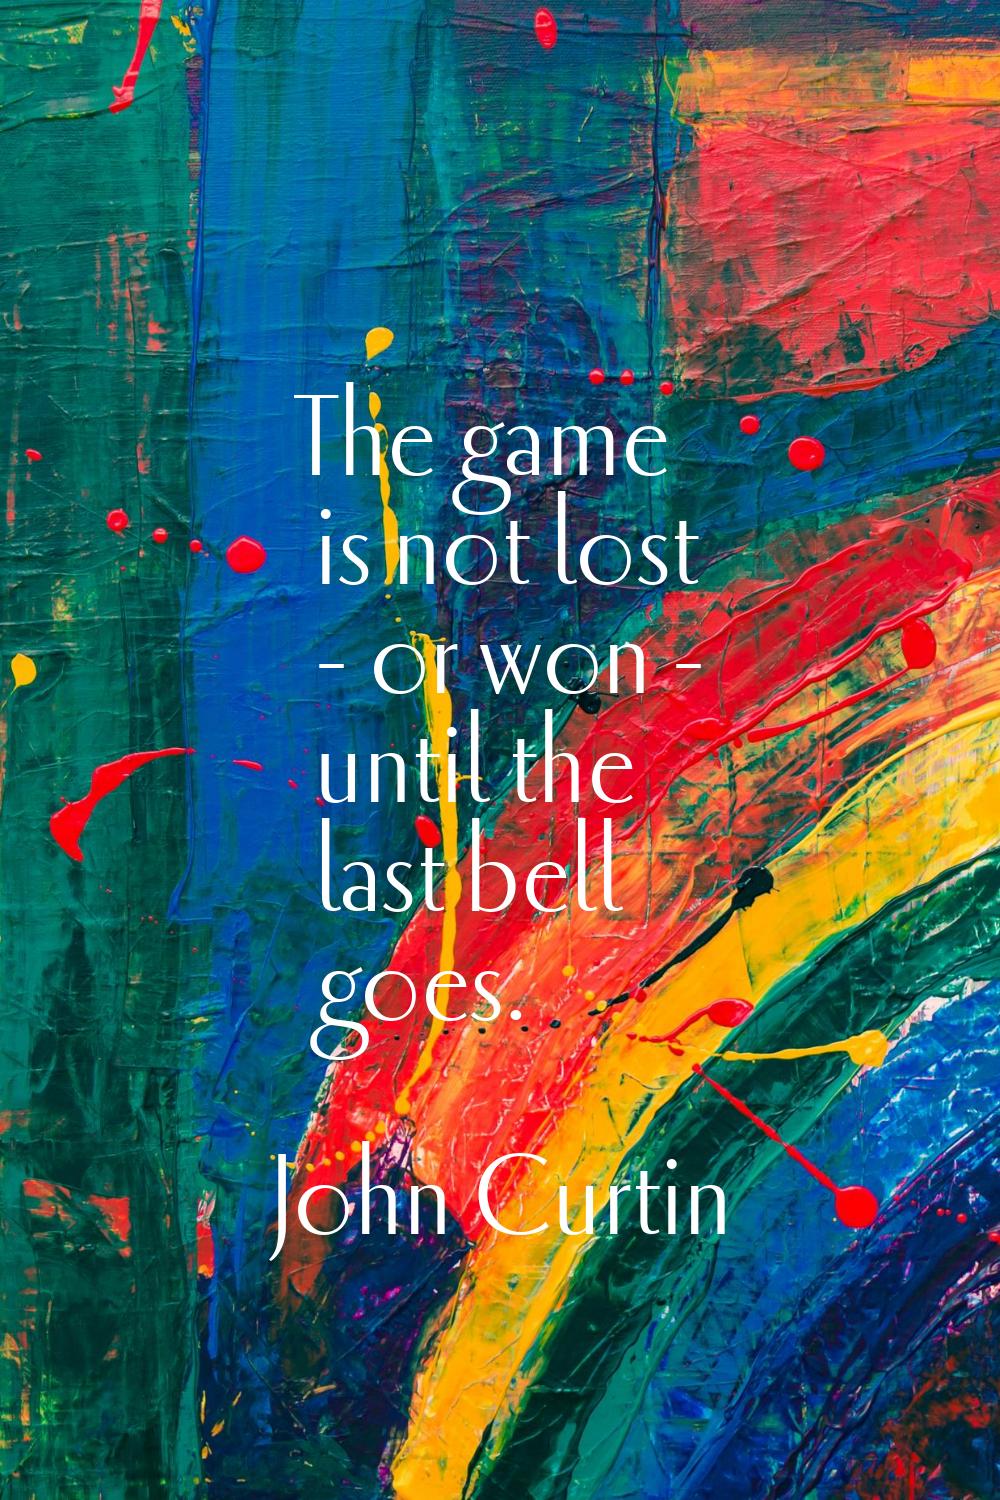 The game is not lost - or won - until the last bell goes.